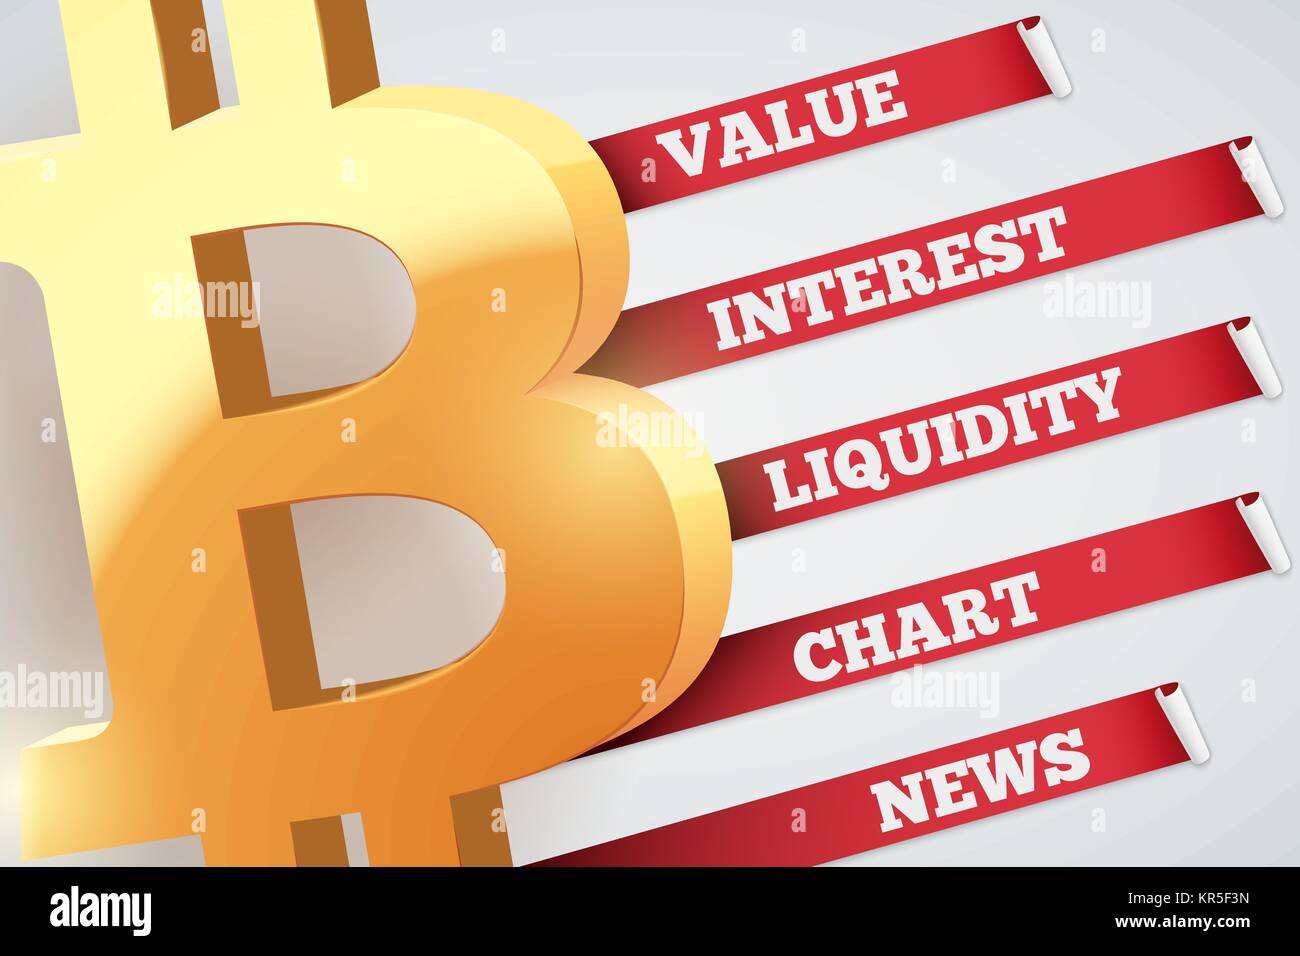 Background of Bitcoin Infographic Stock Vector